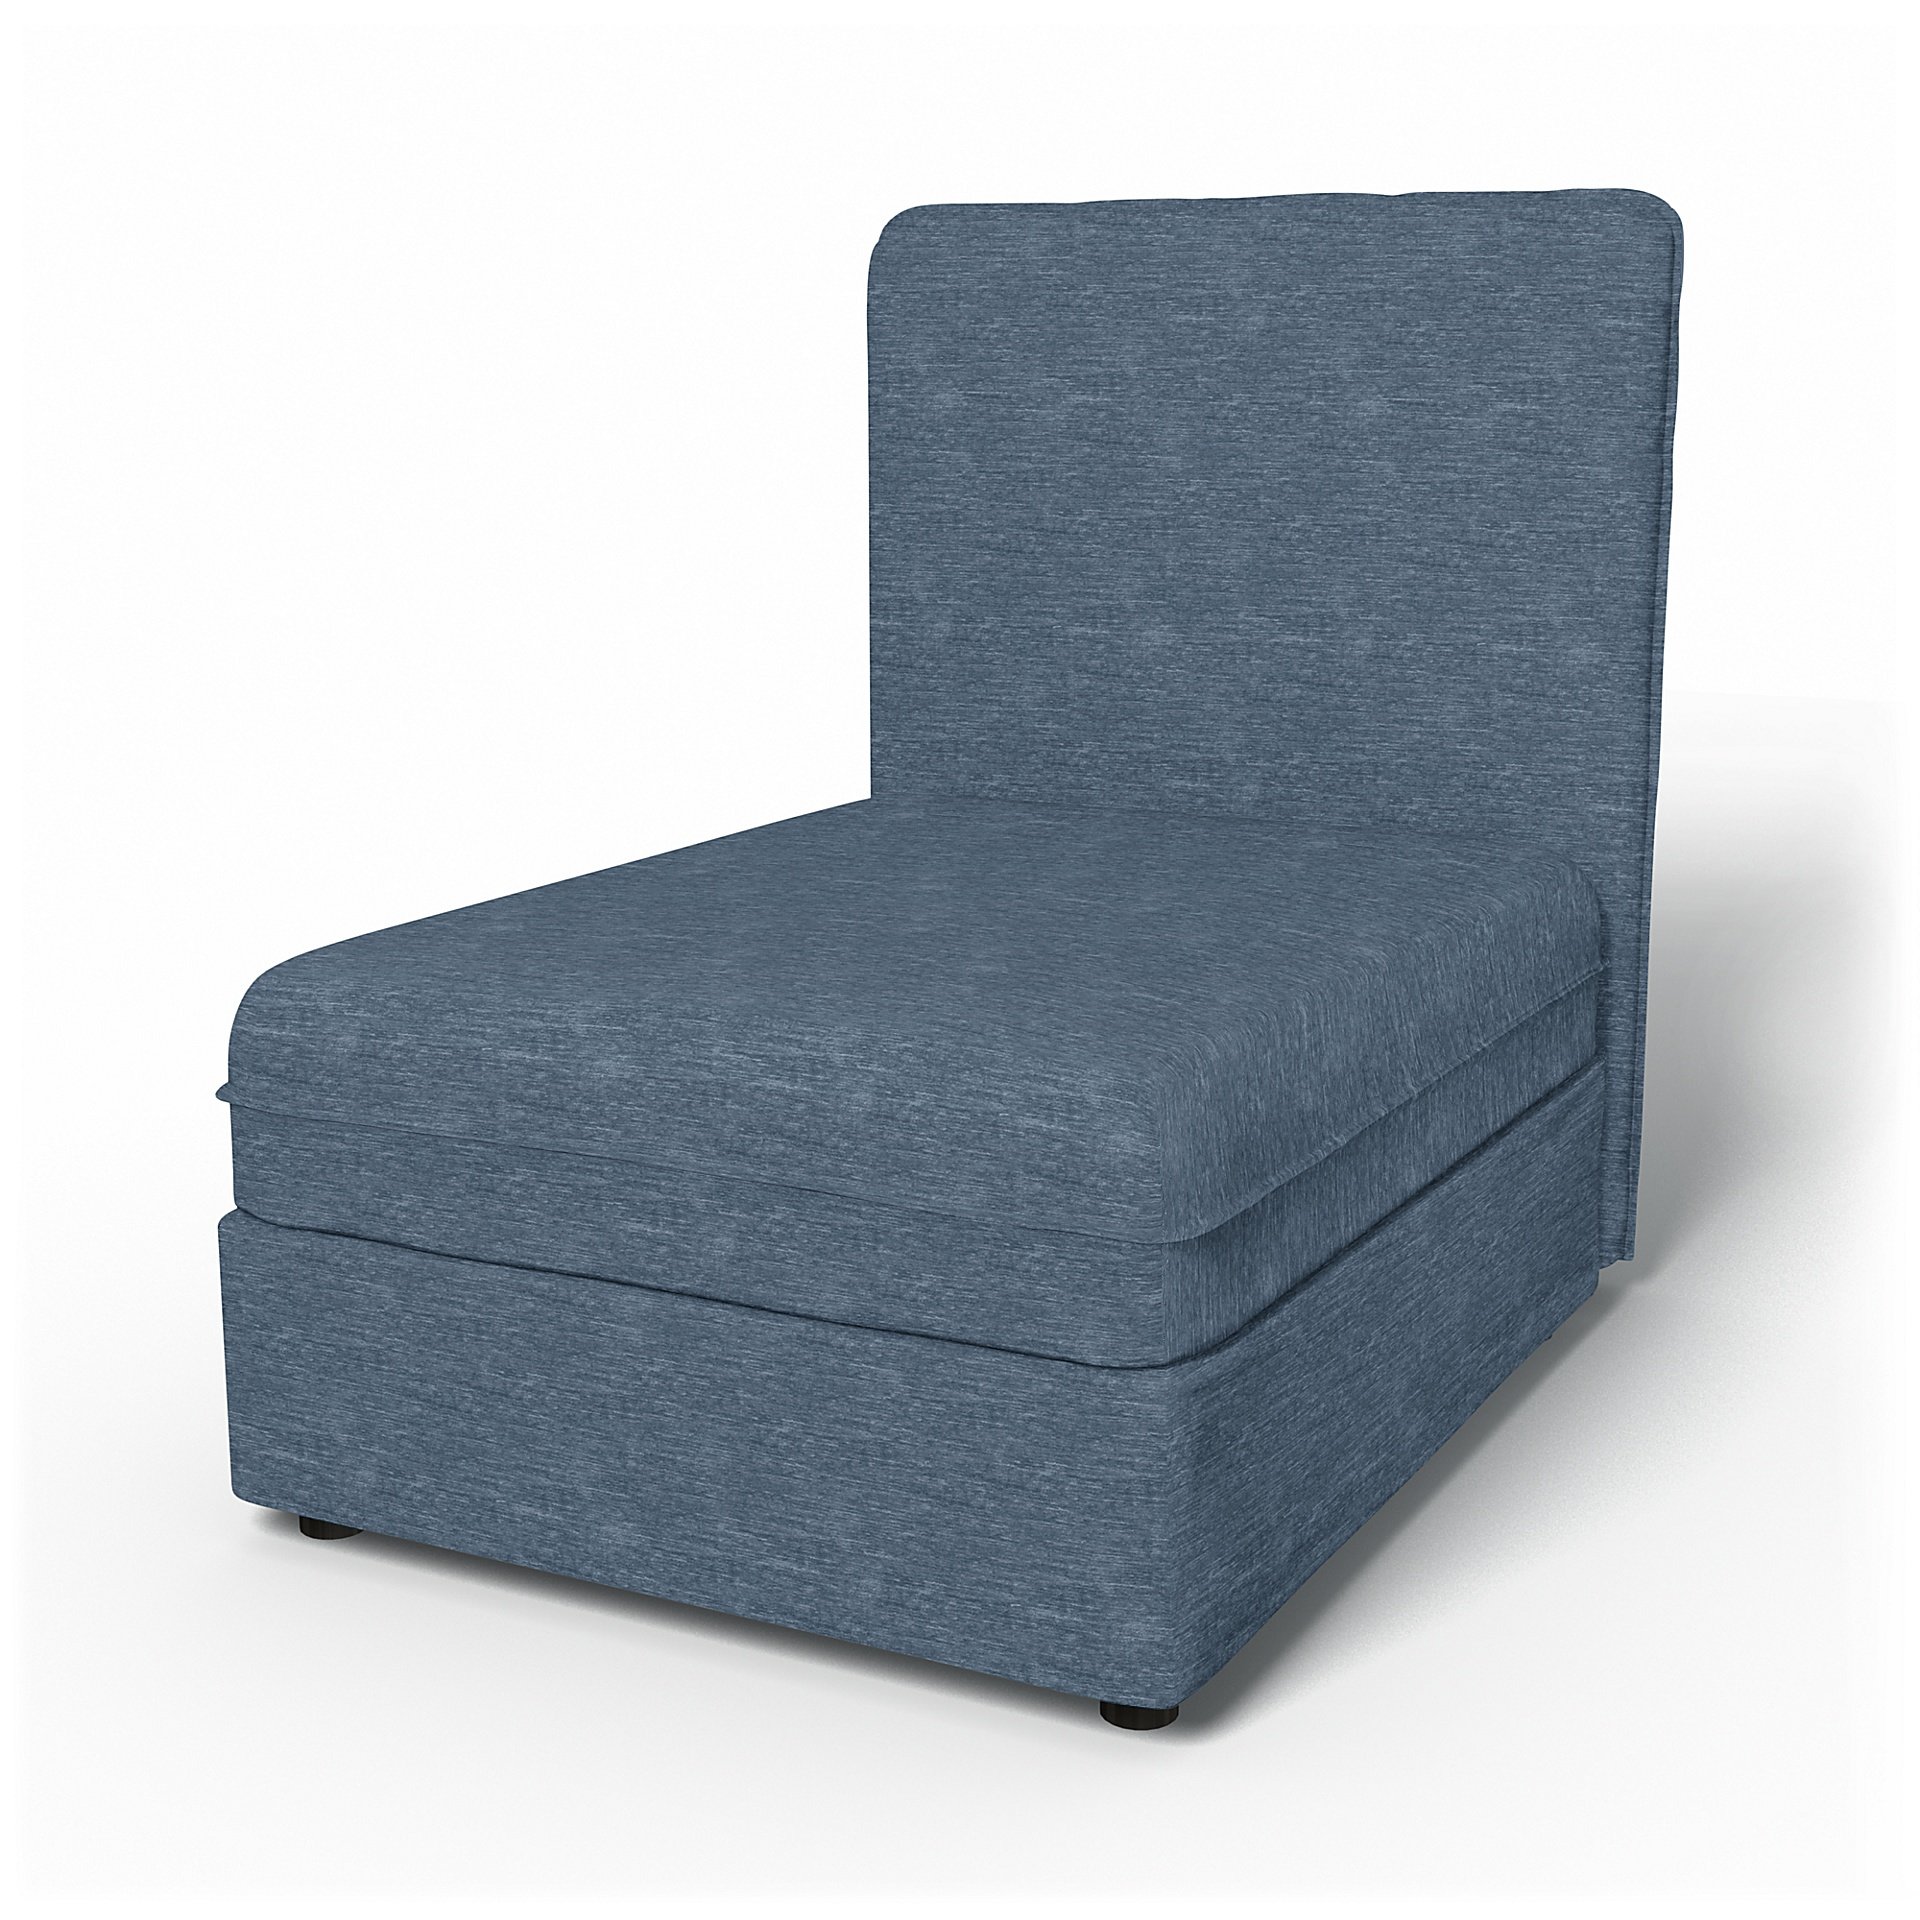 IKEA - Vallentuna Seat Module with High Back Cover 80x100cm 32x32in, Mineral Blue, Velvet - Bemz